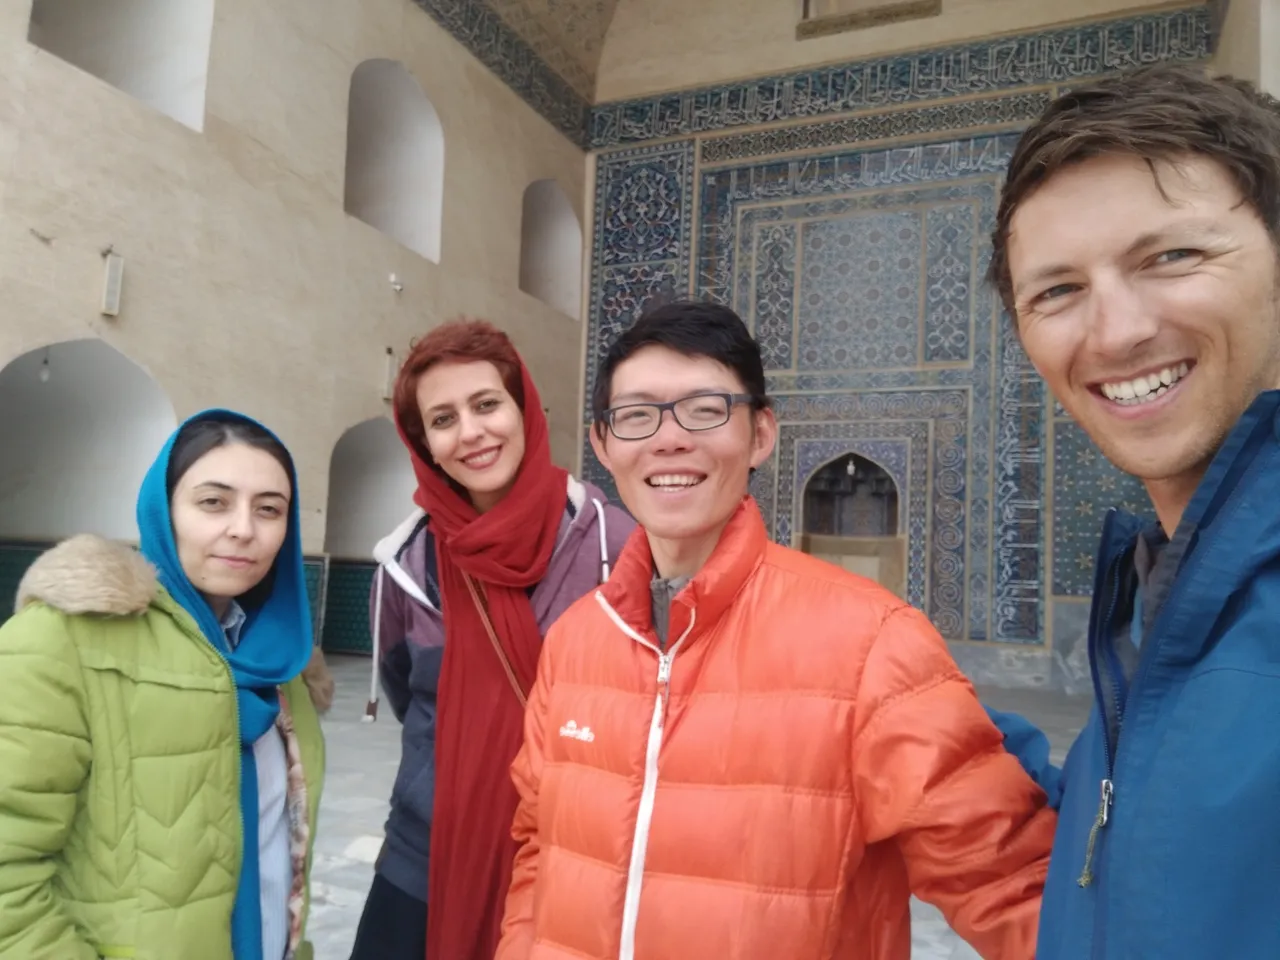 Kindness I encountered from strangers while travelling: Iran